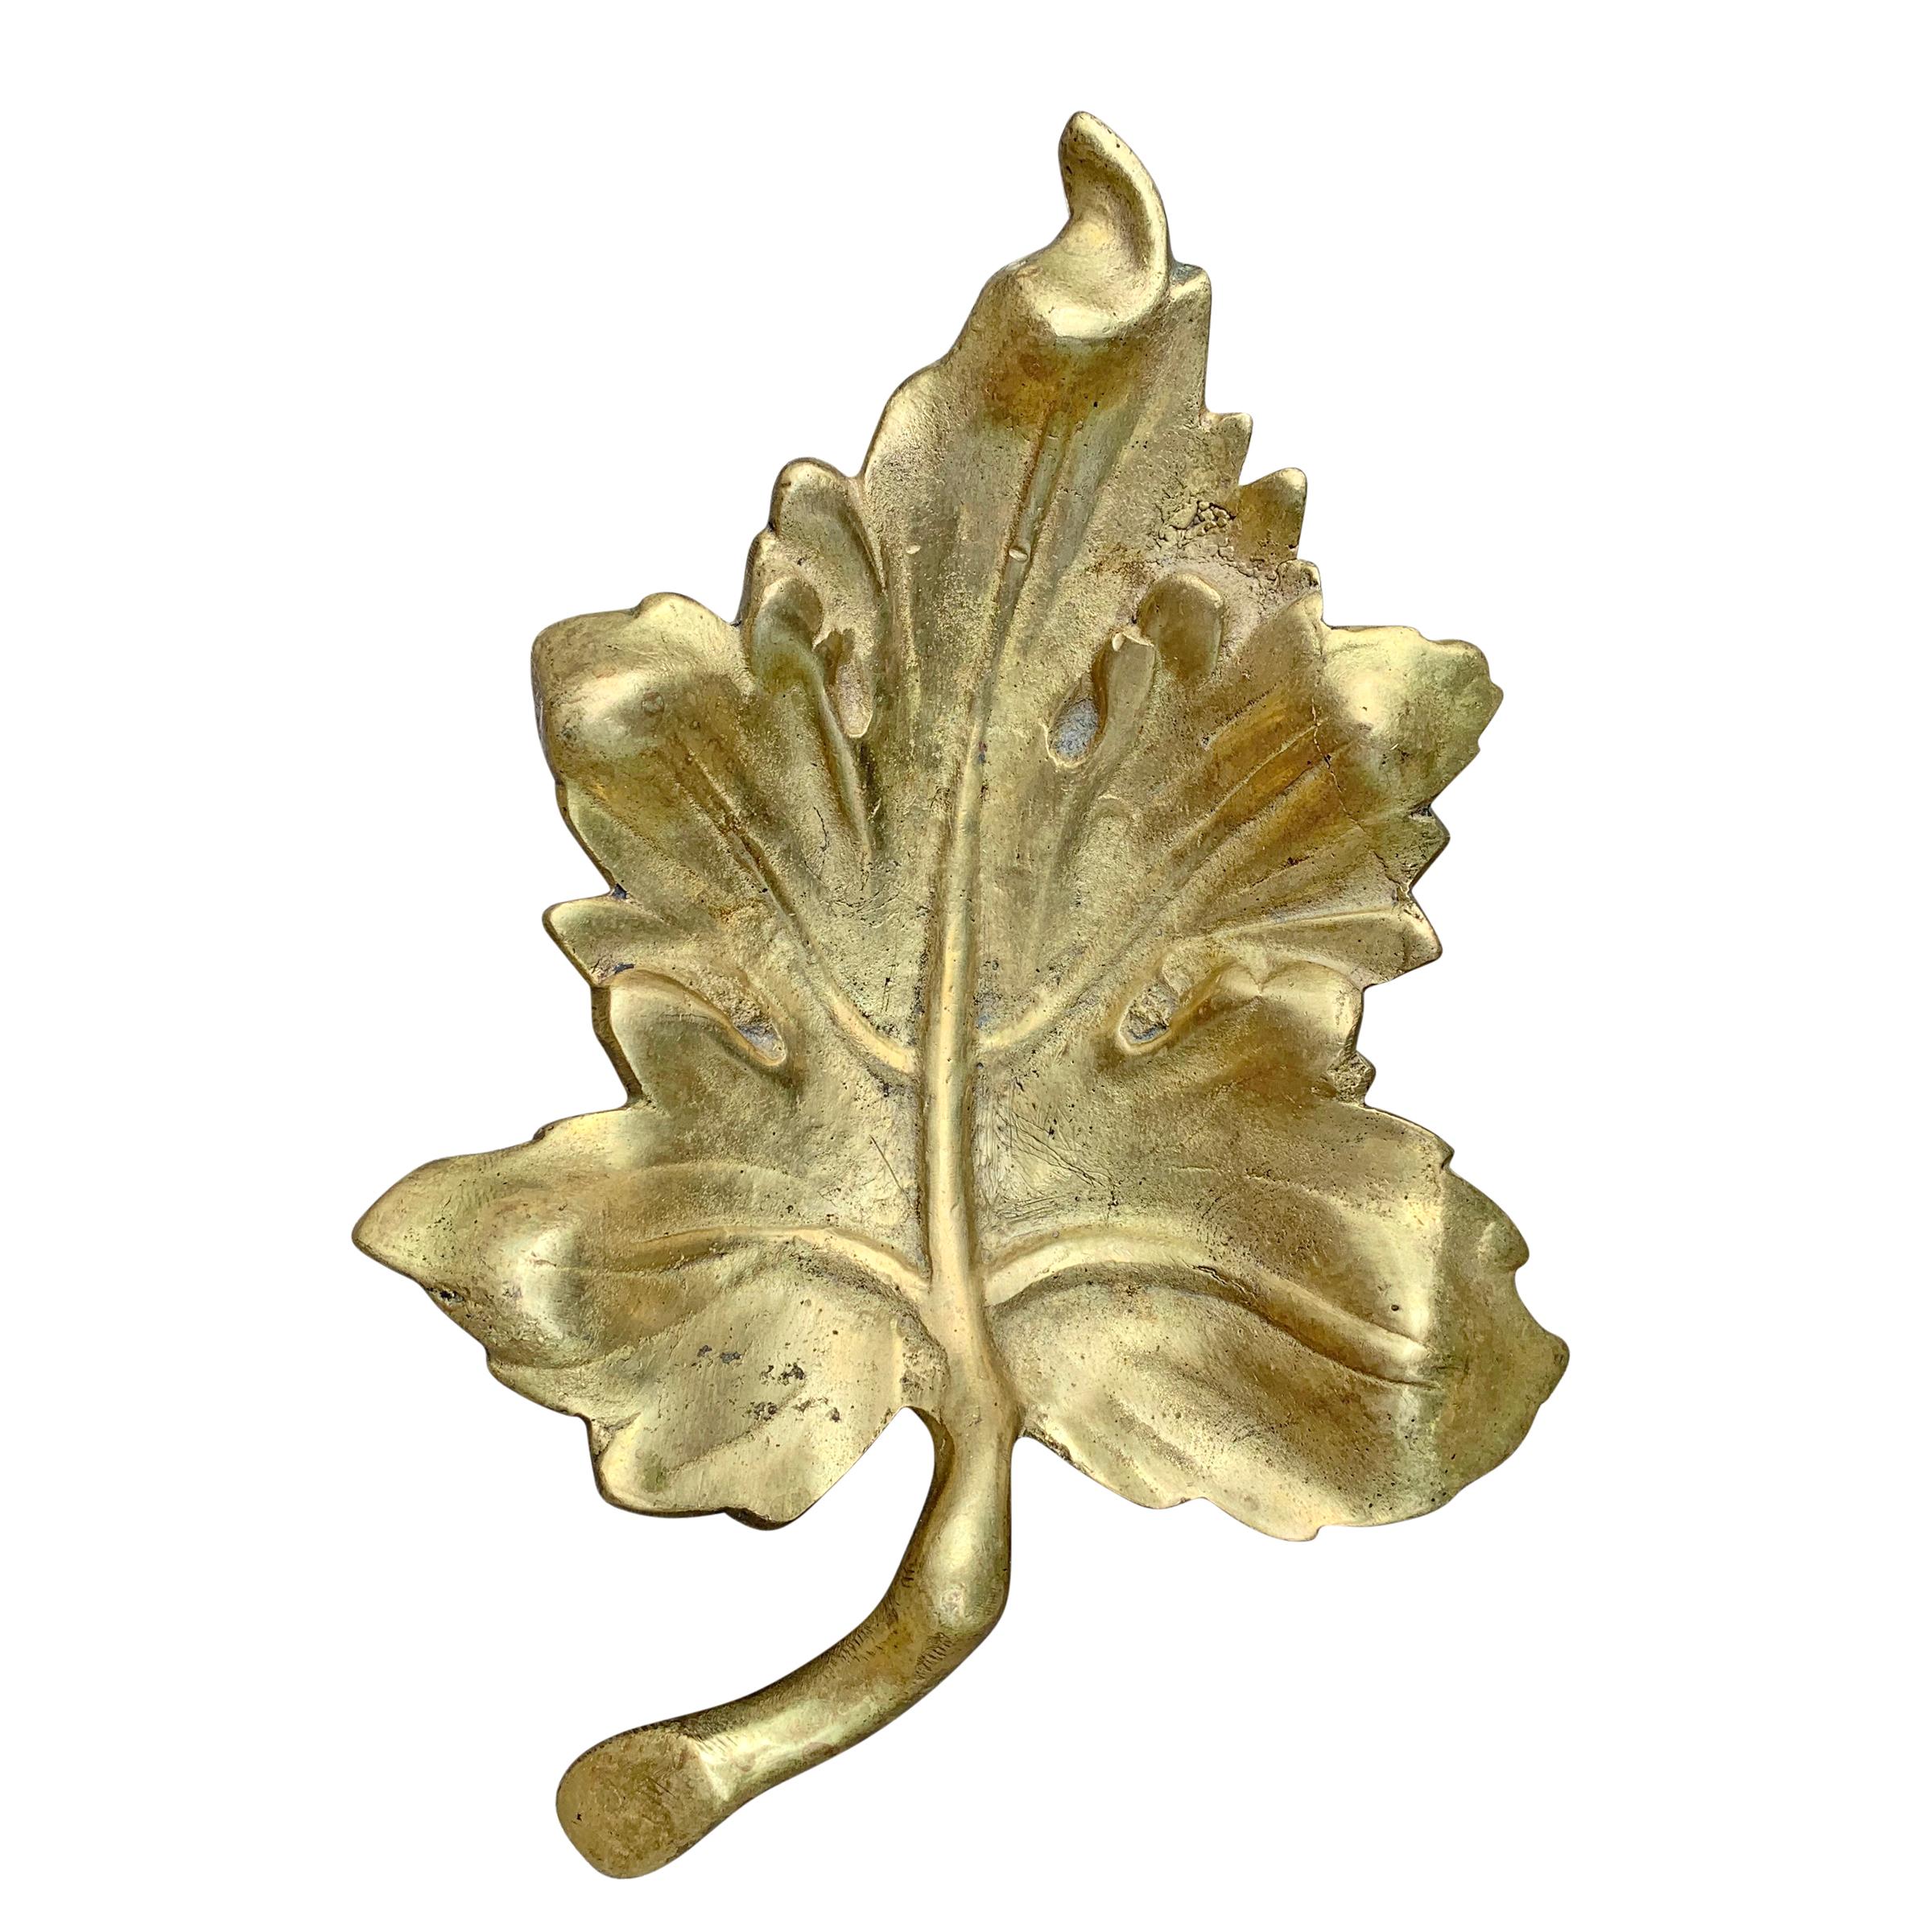 A super cool 20th century American cast bronze leaf dish with a worn finish and a beautiful patina. Perfect for change, keys, or other vices!